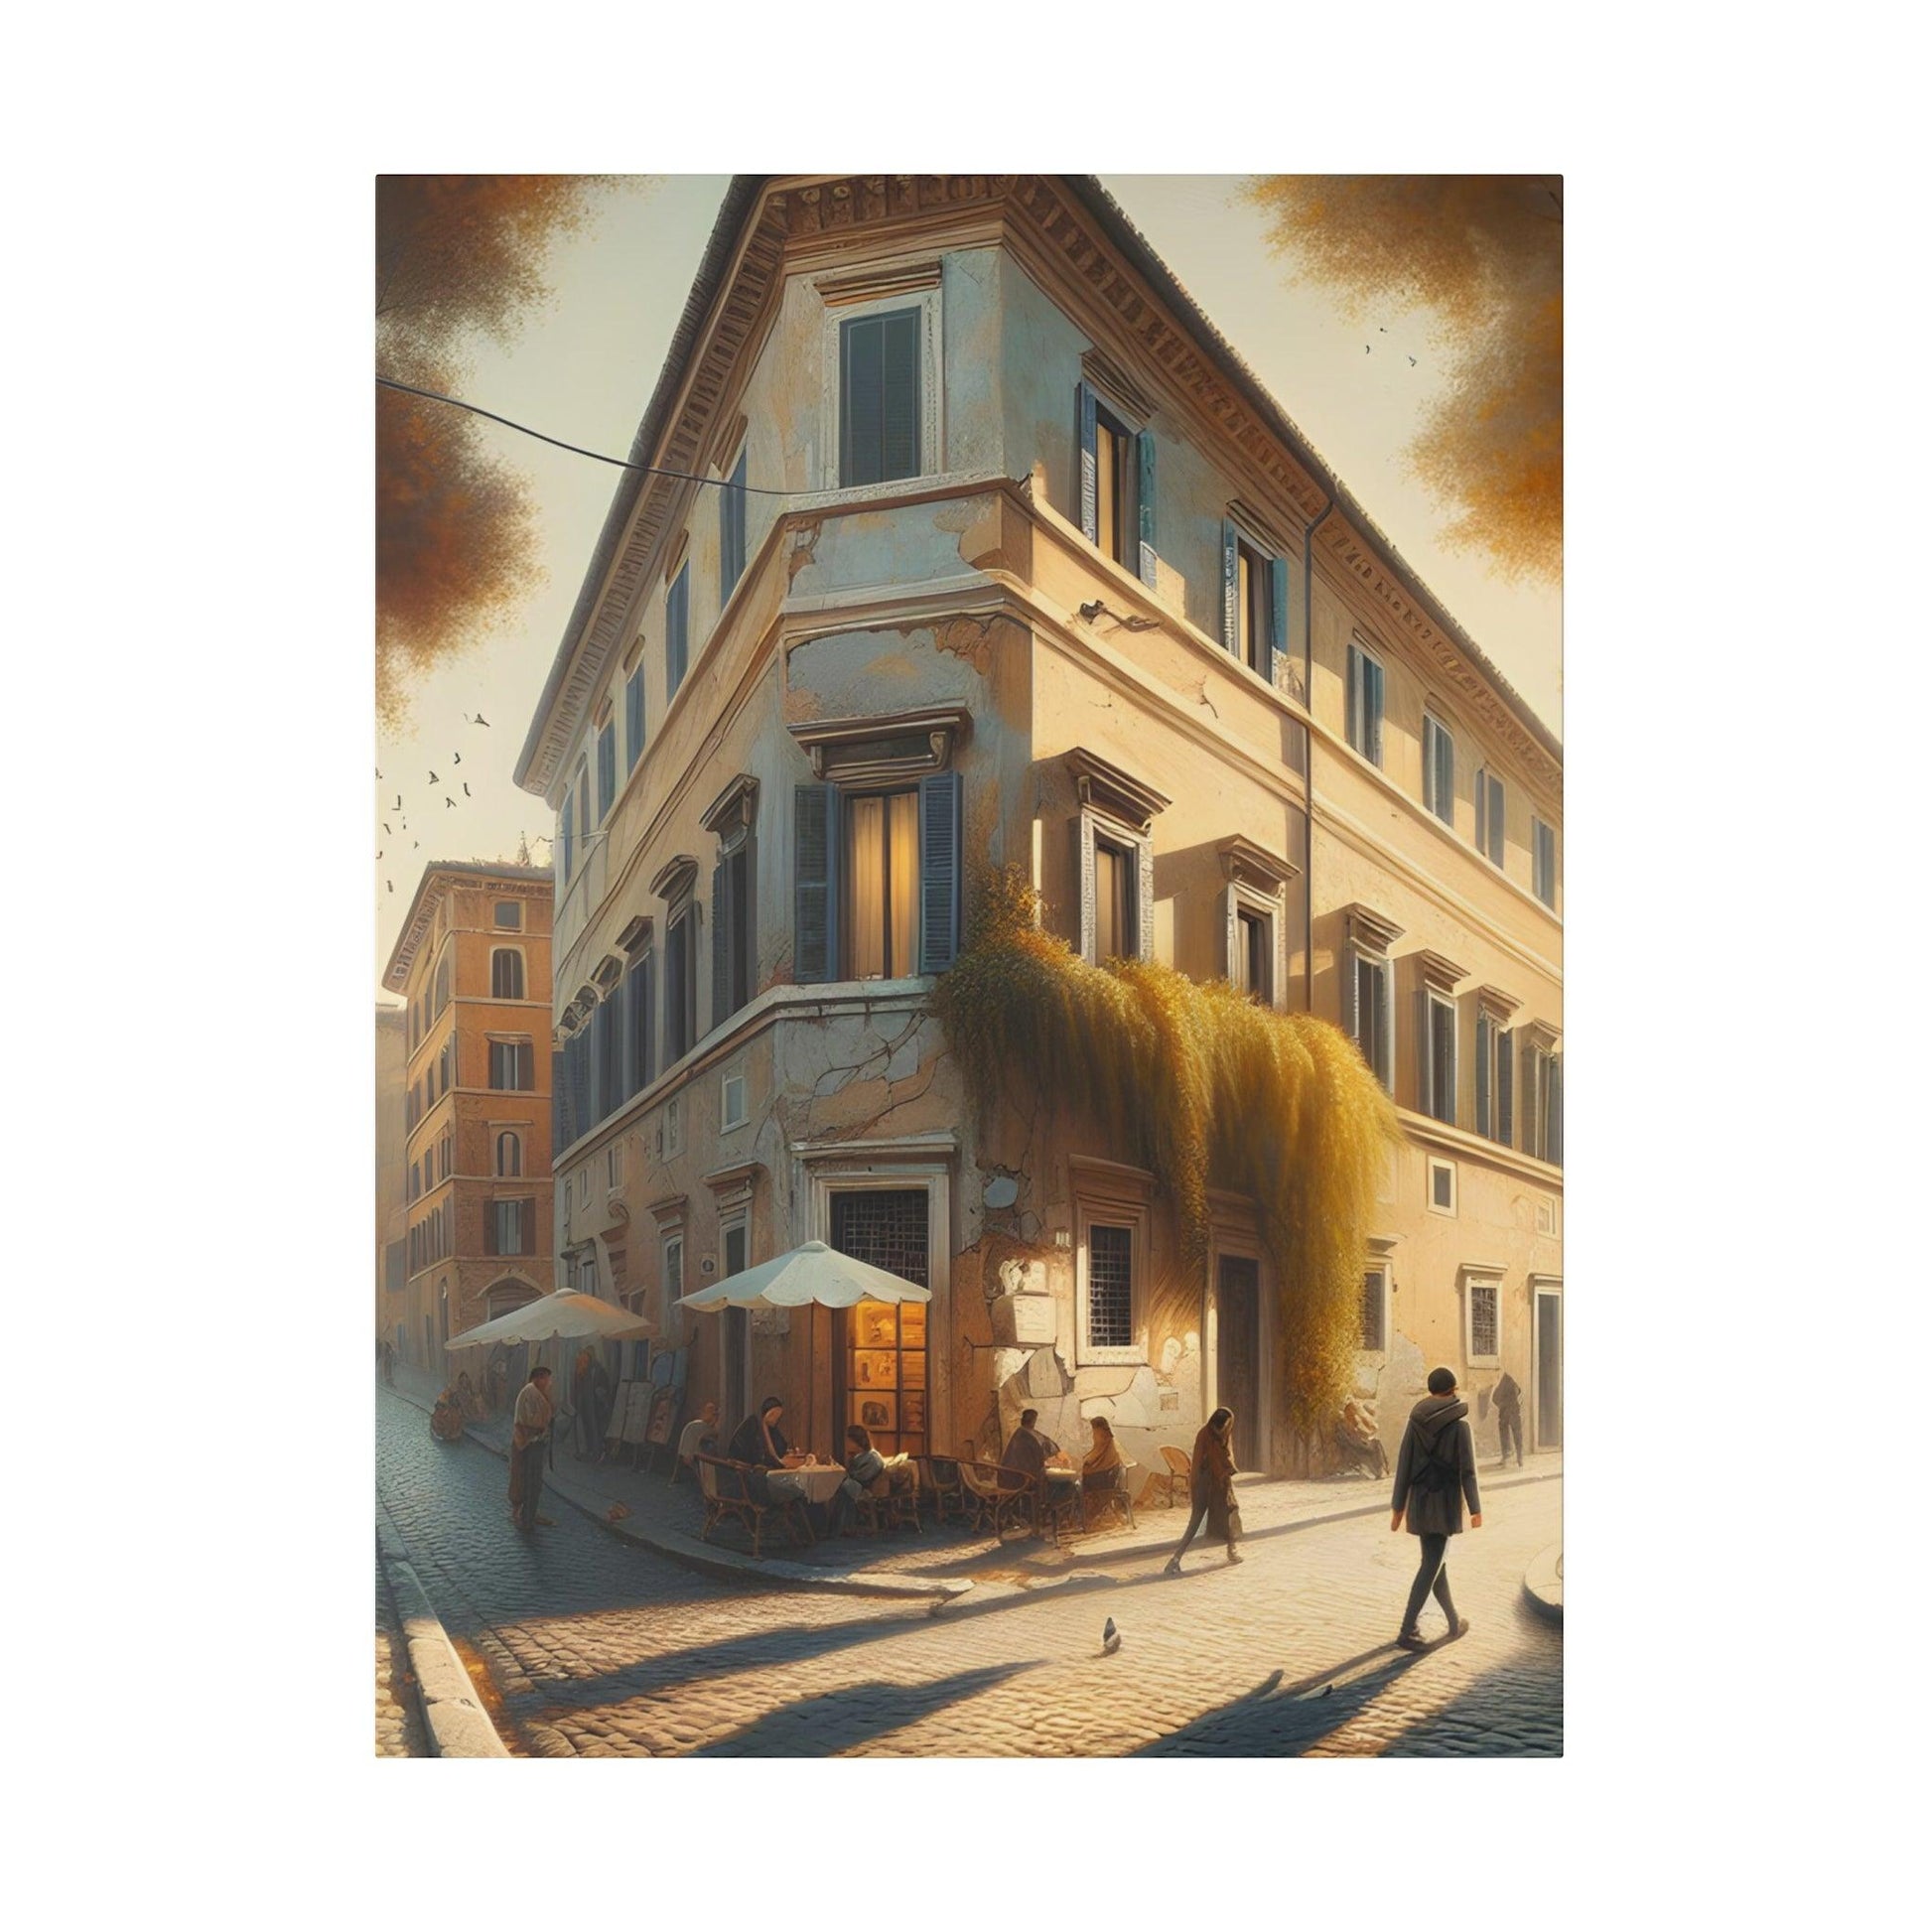 "Rome Emblazoned: Serenity in Canvas" - The Alice Gallery